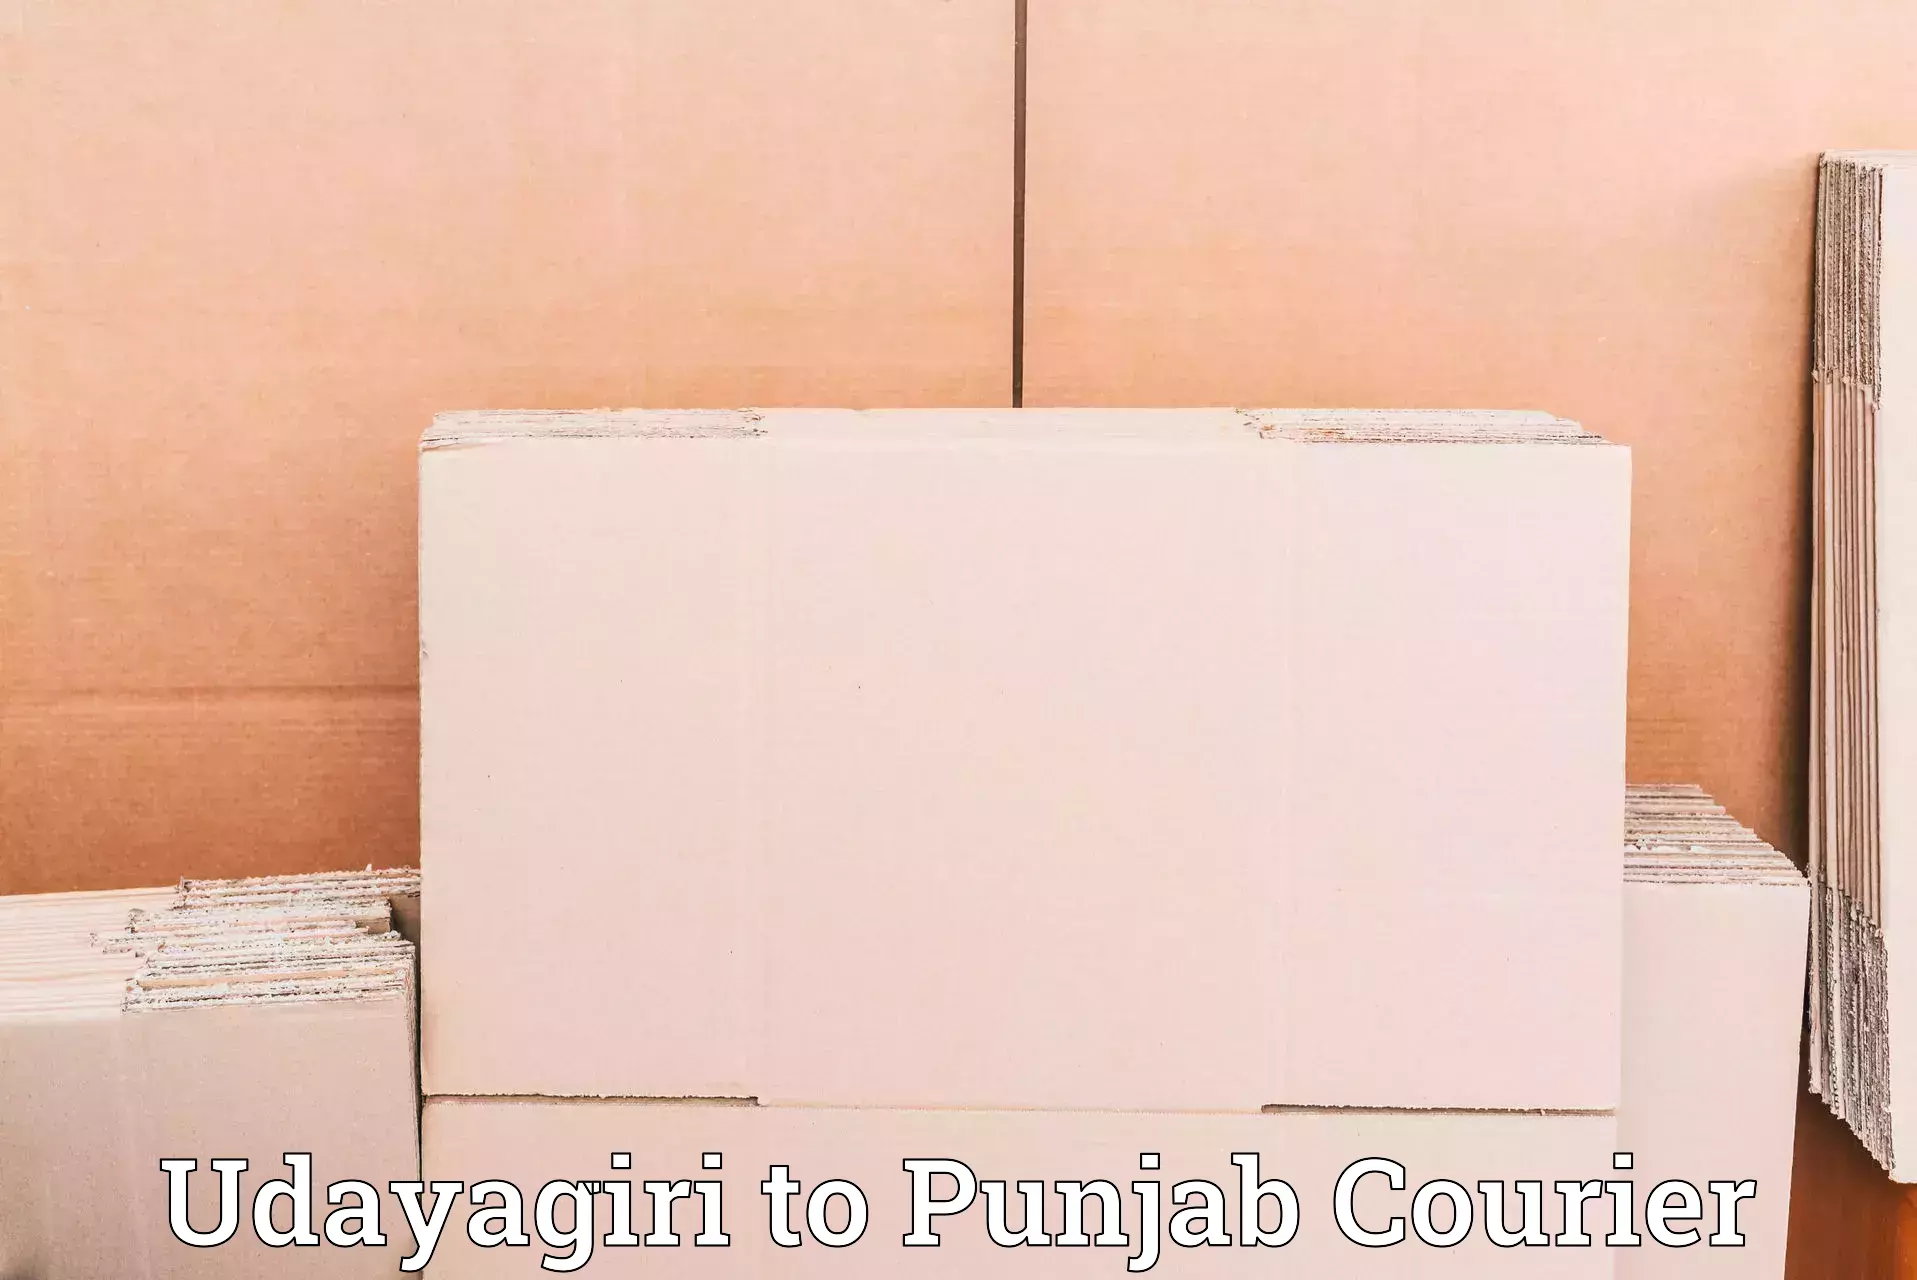 Efficient package consolidation in Udayagiri to Anandpur Sahib